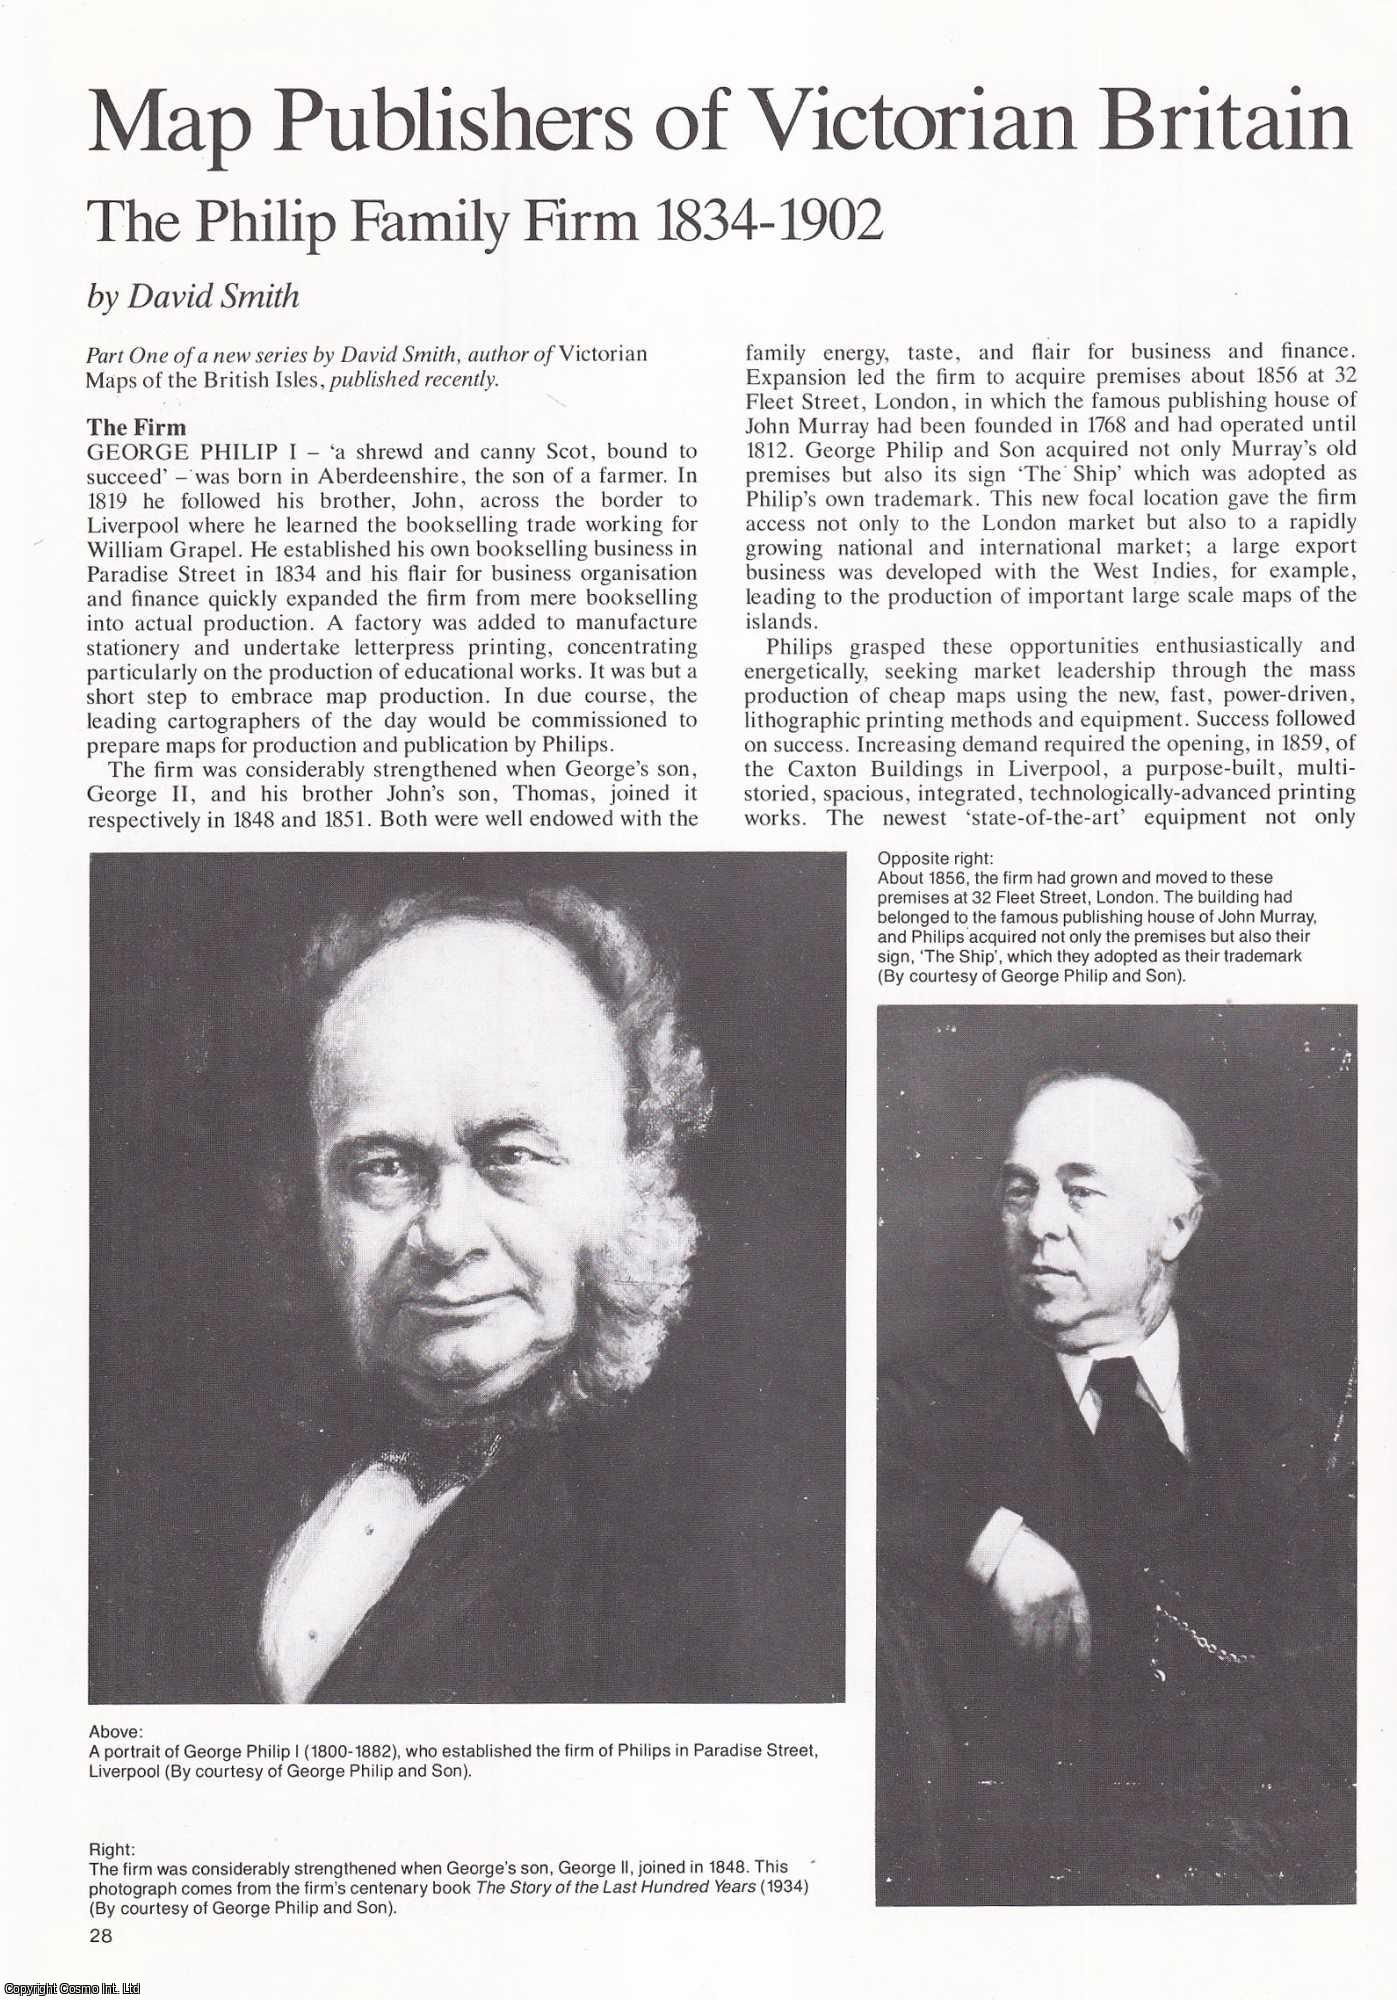 David Smith - The Philip Family Firm, 1834-1902: Map Publishers of Victorian Britain. An original article from Map Collector Magazine, 1987.